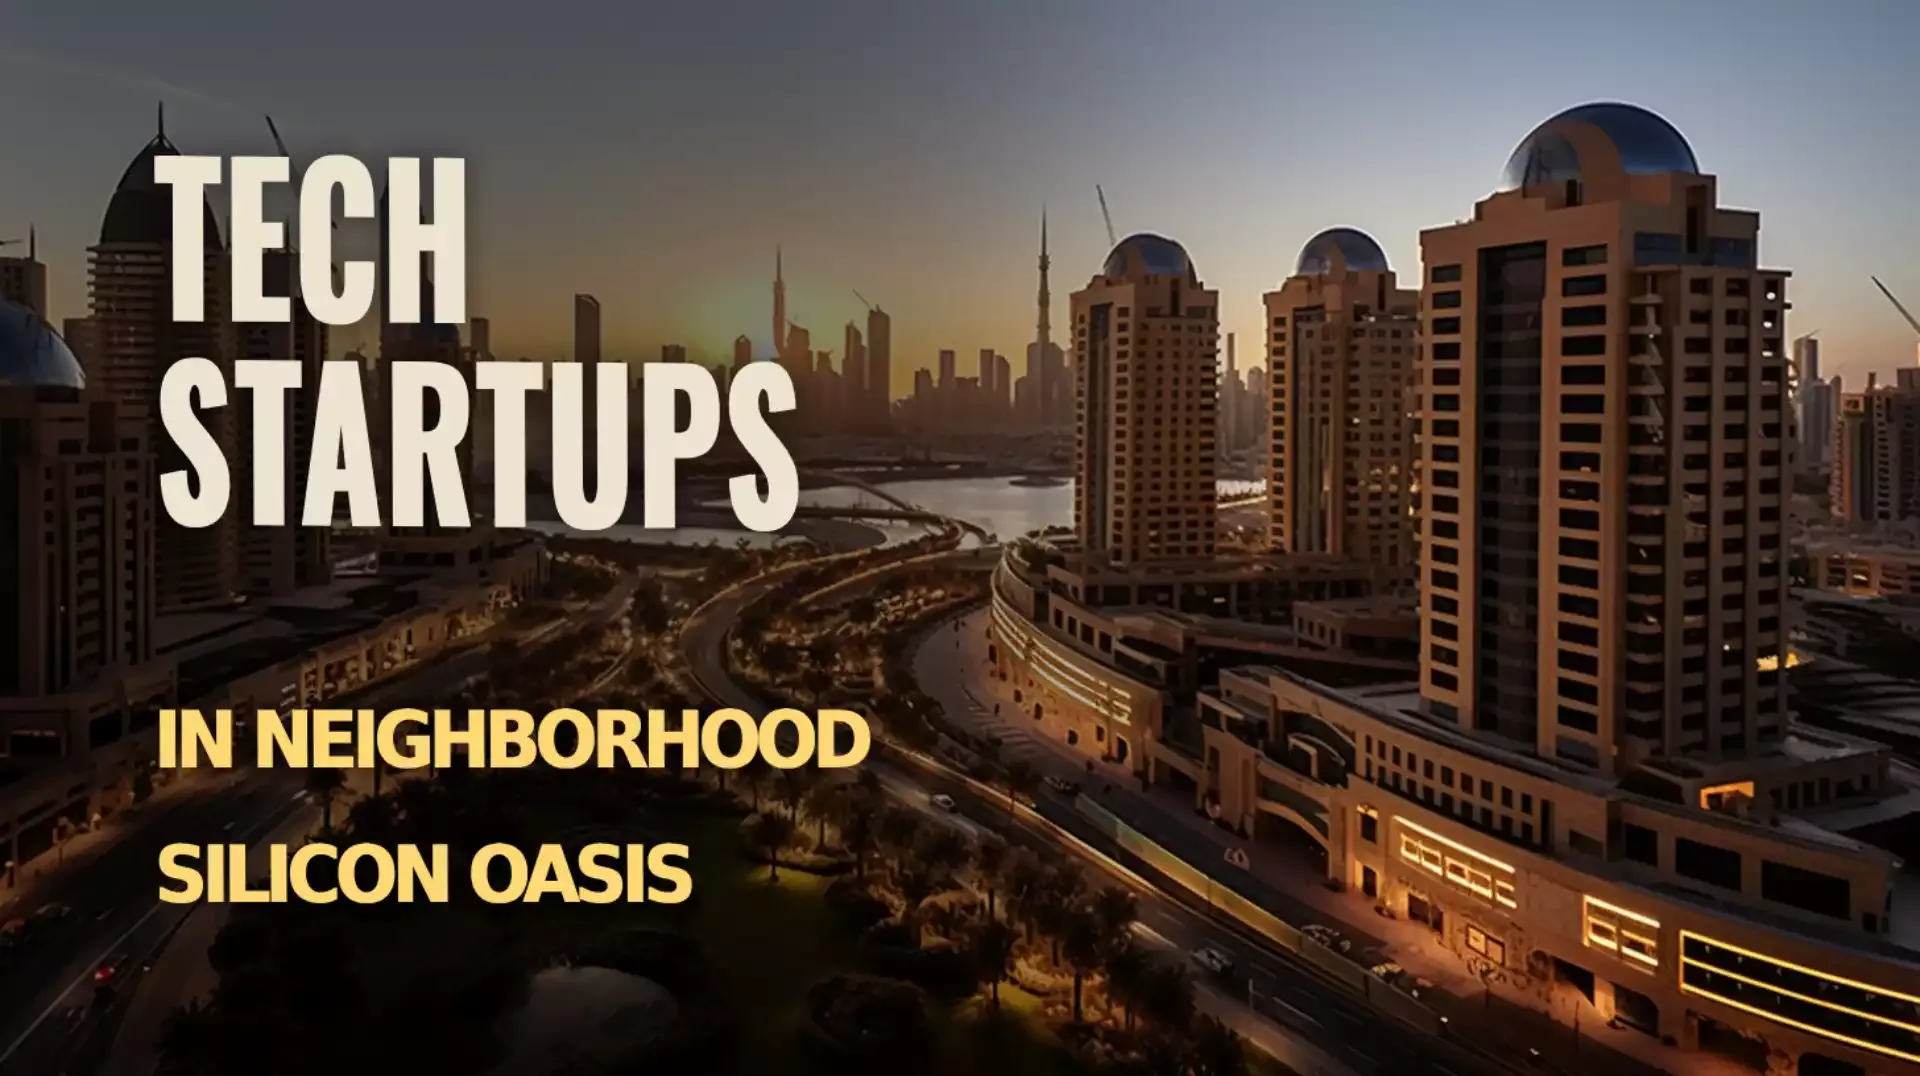 Innovation Hub: Tech Startups in Silicon Oasis